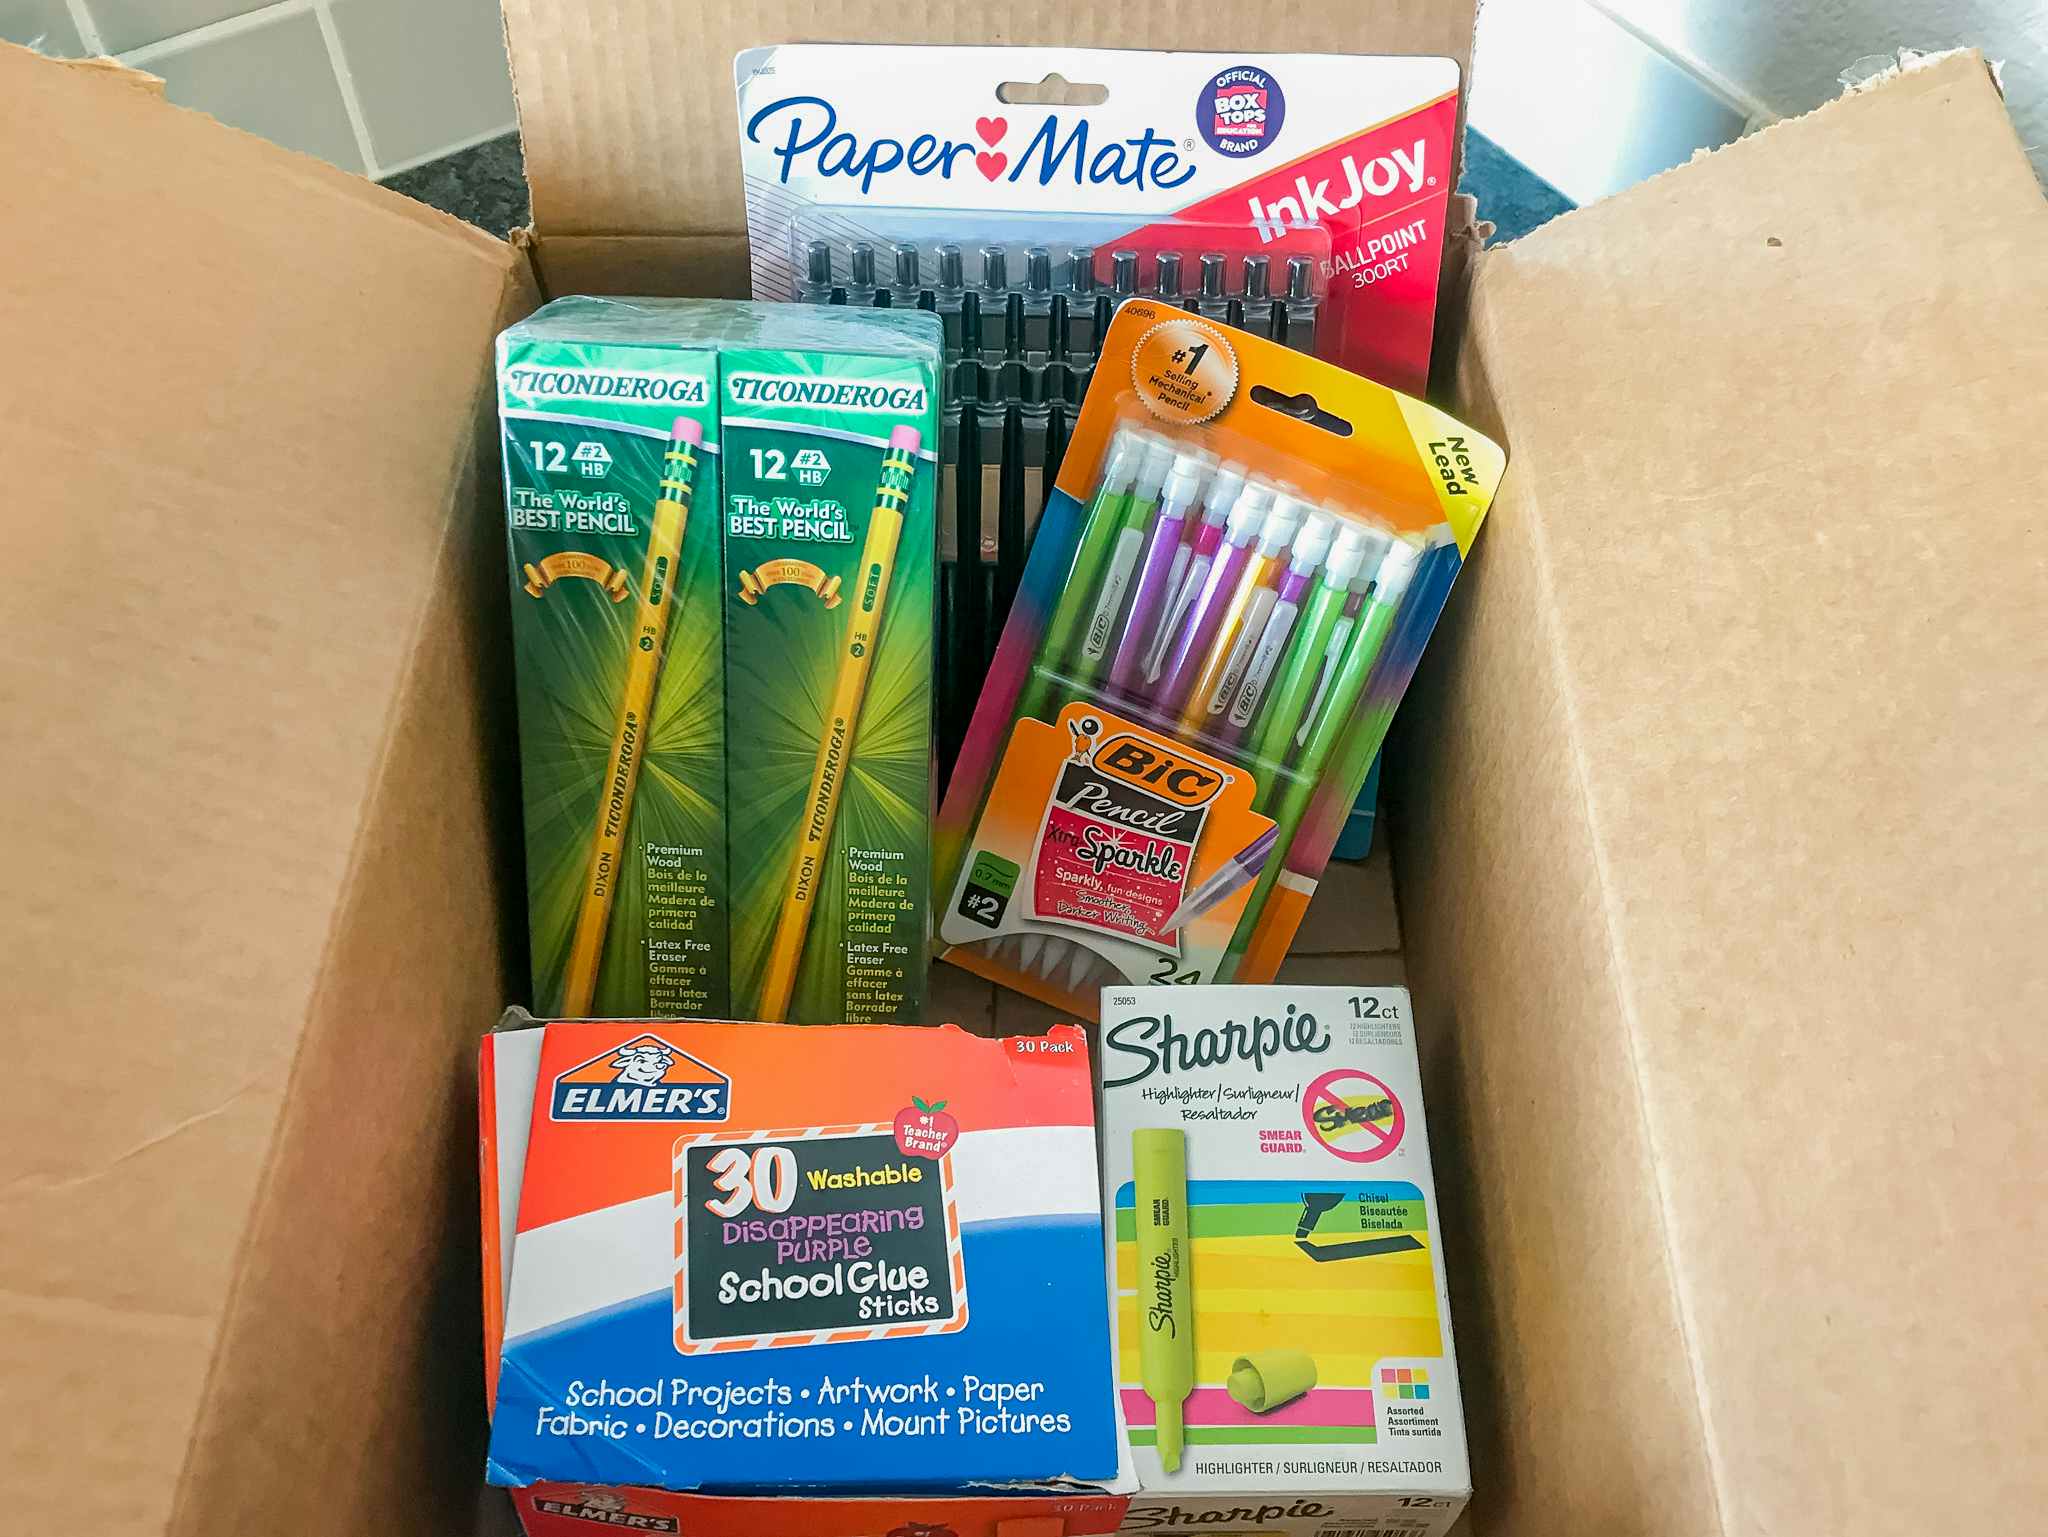 A box filled with school supplies including pencils, mechanical pencils, and glue sticks.